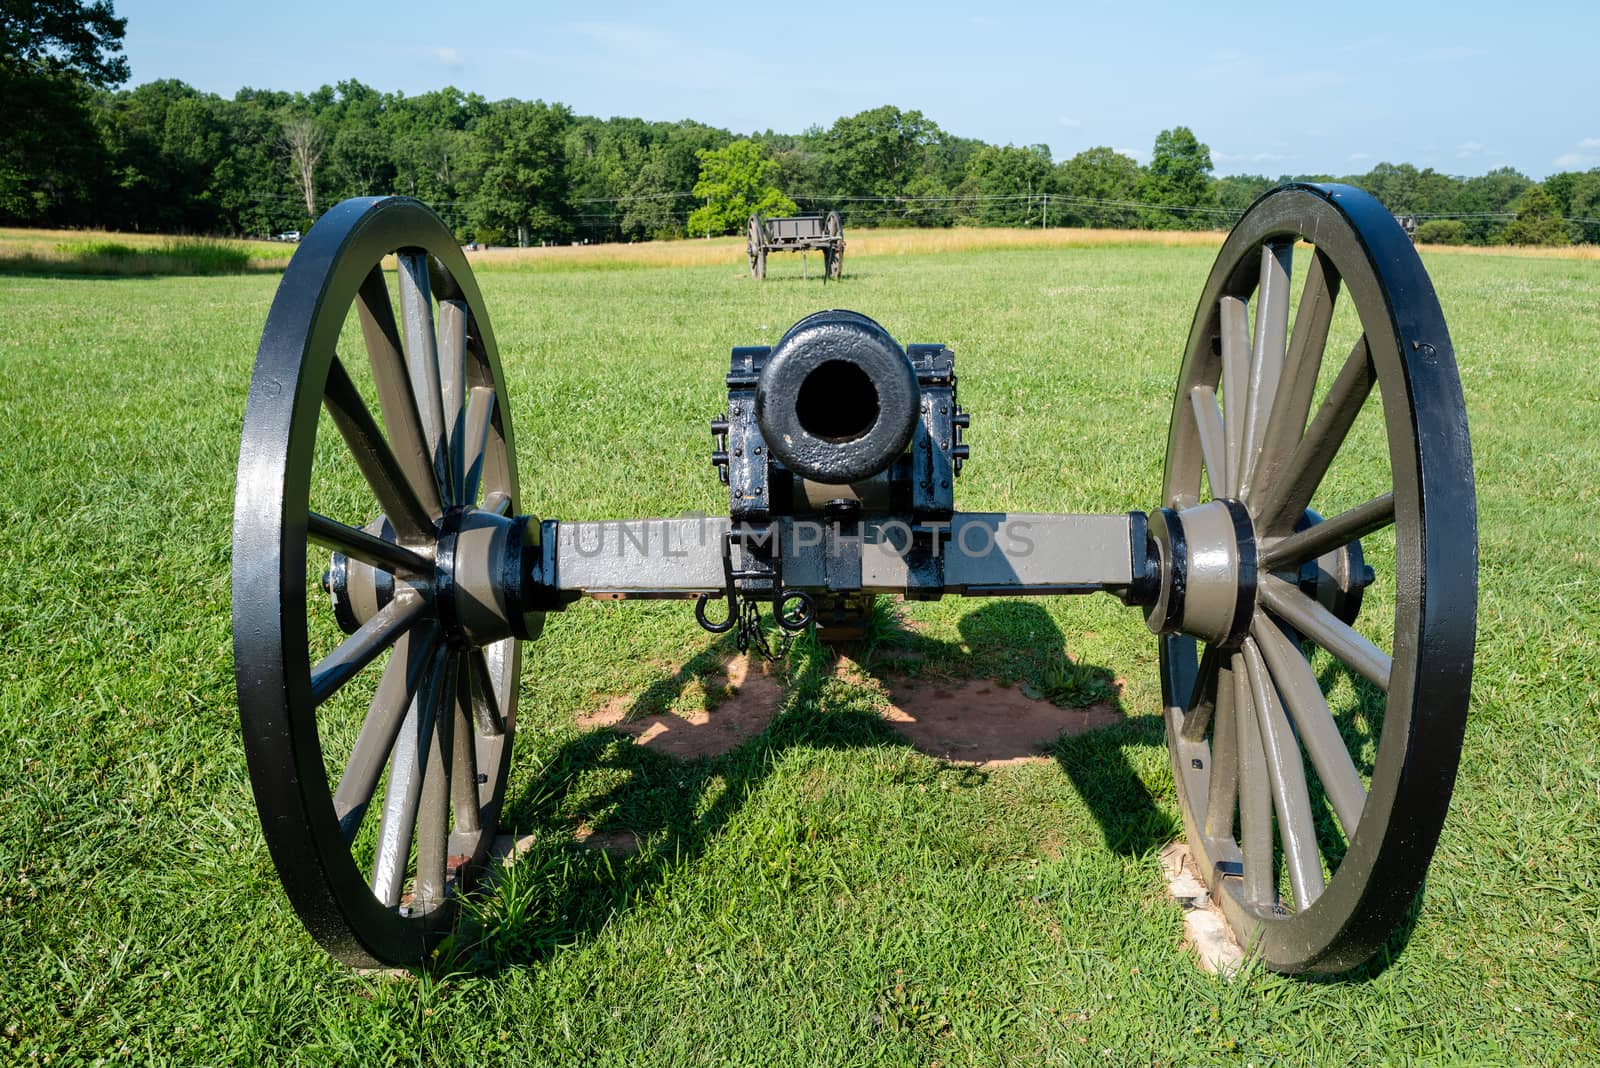 Close-up photo of a cannon from the Civil War battle Battle of Bull Run.